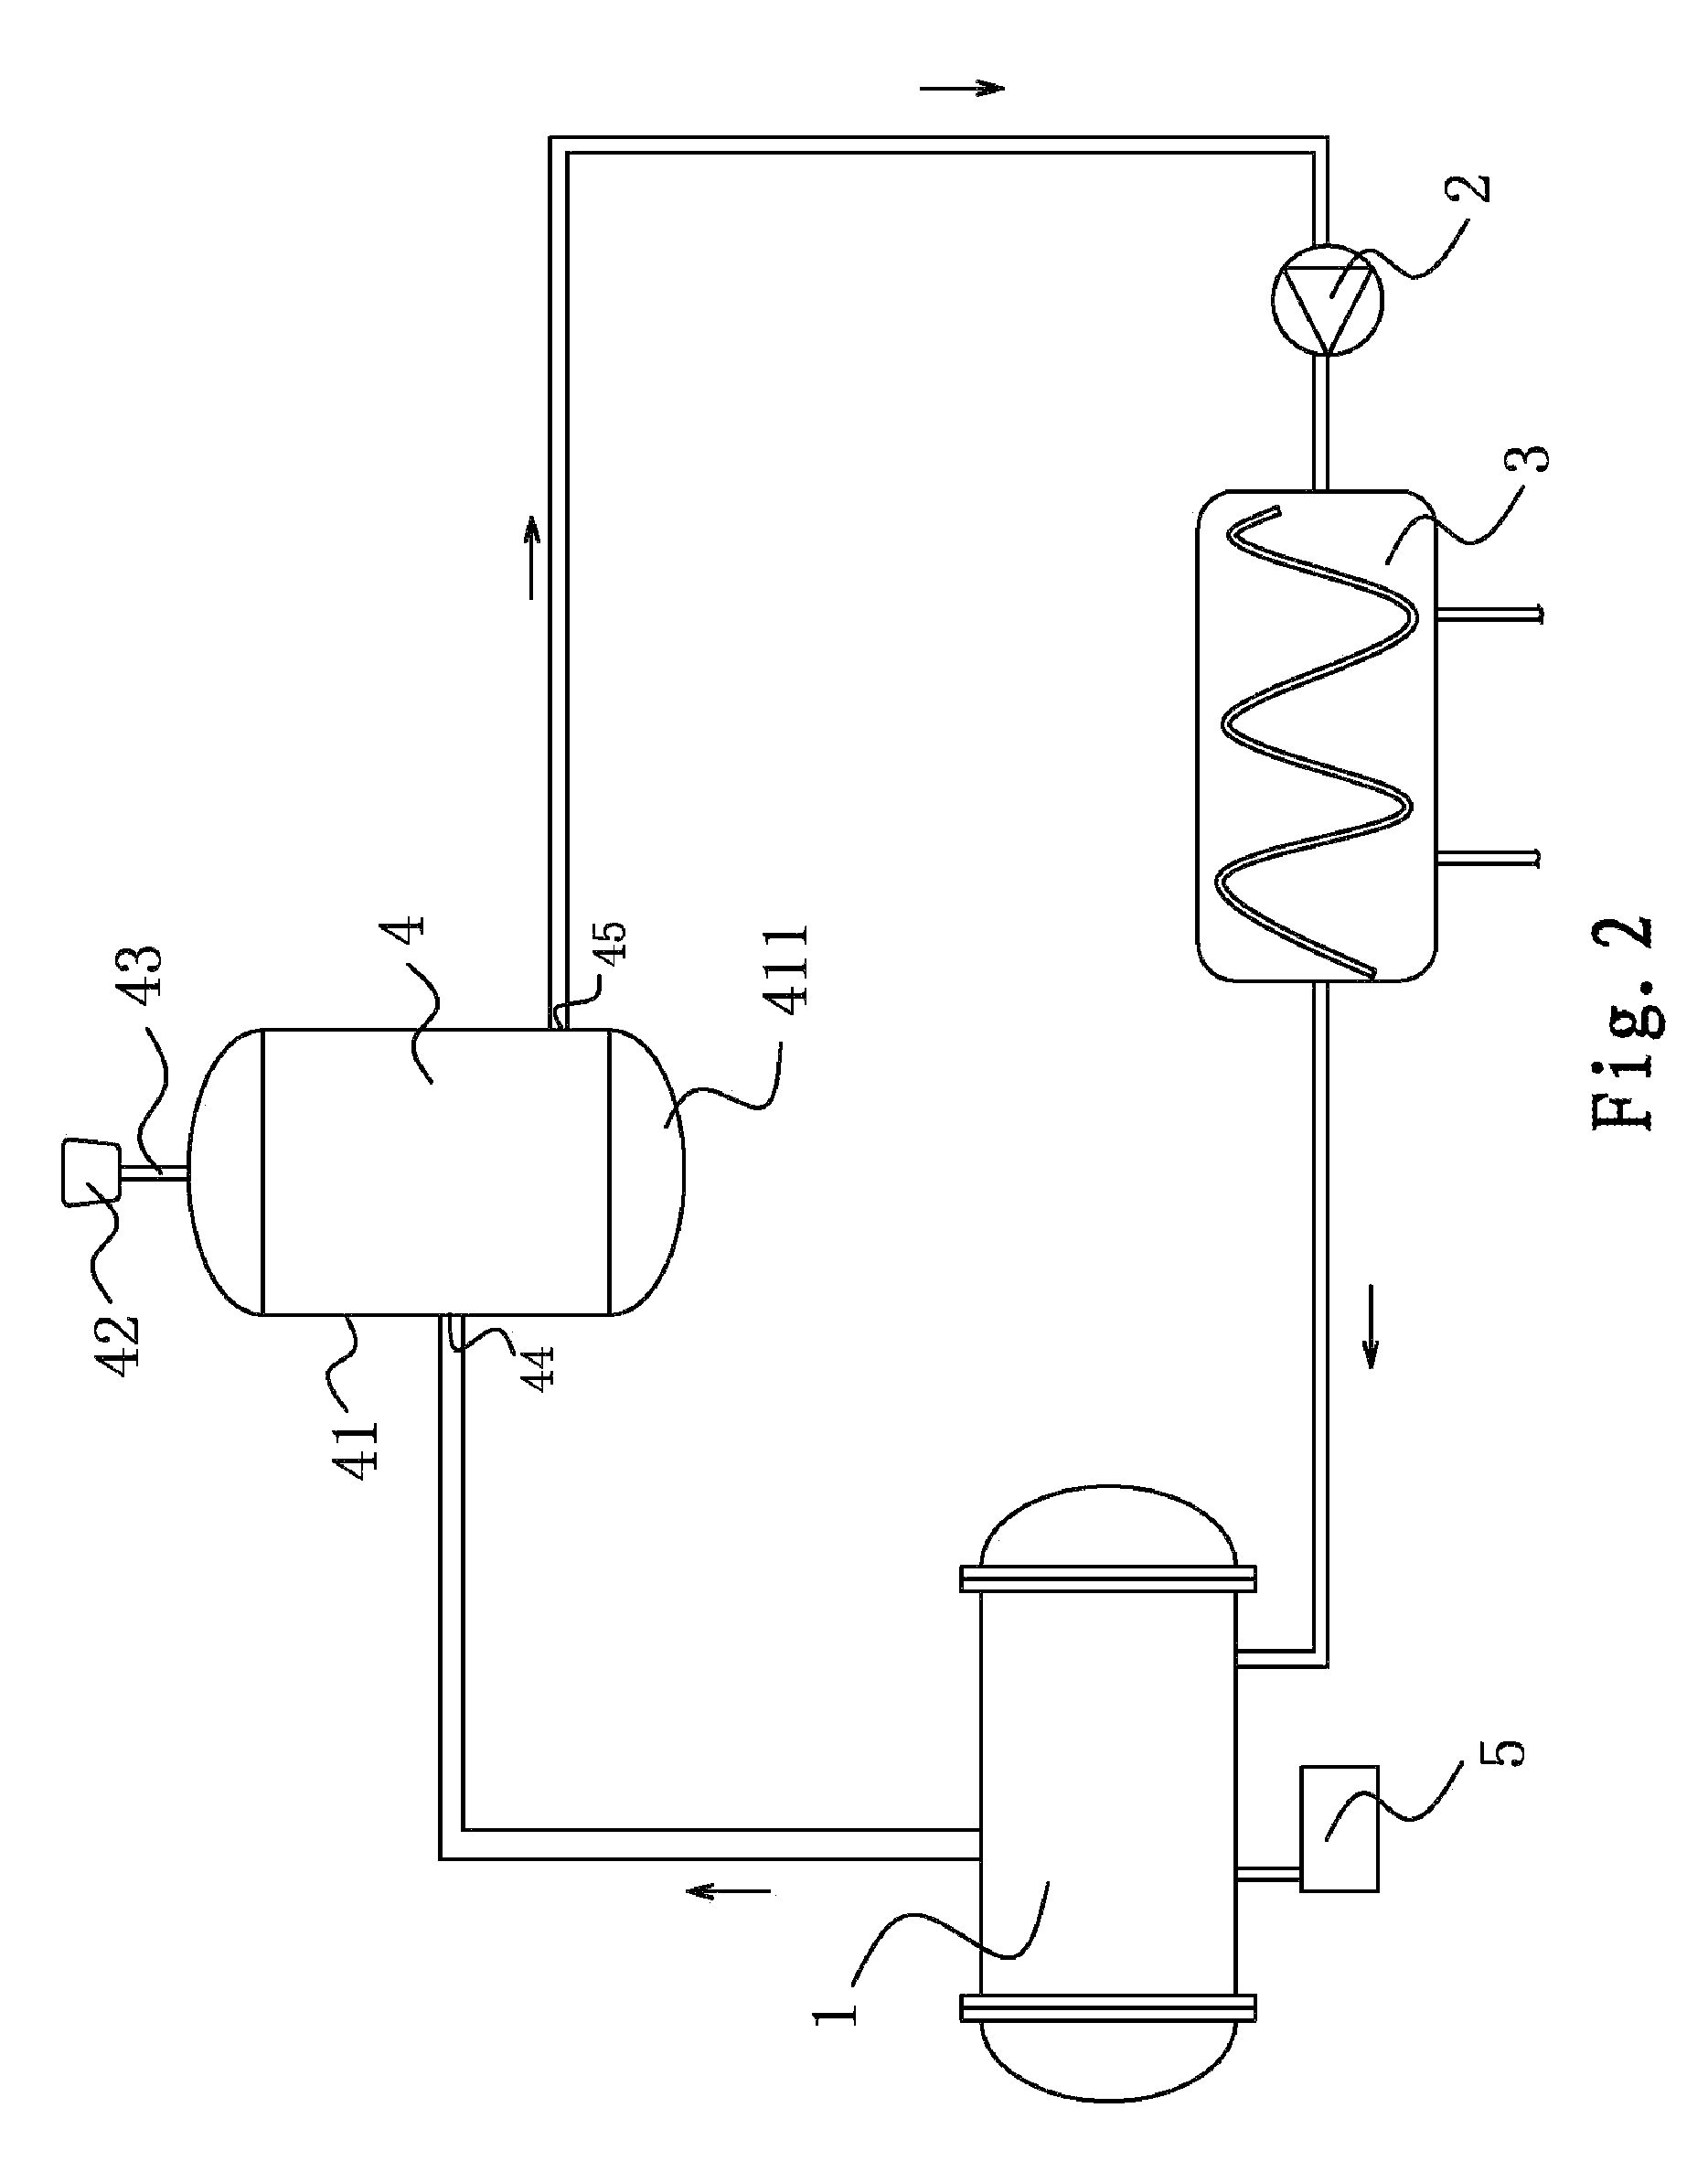 Exhaust gas expansion tank and ozone generator system applying the same